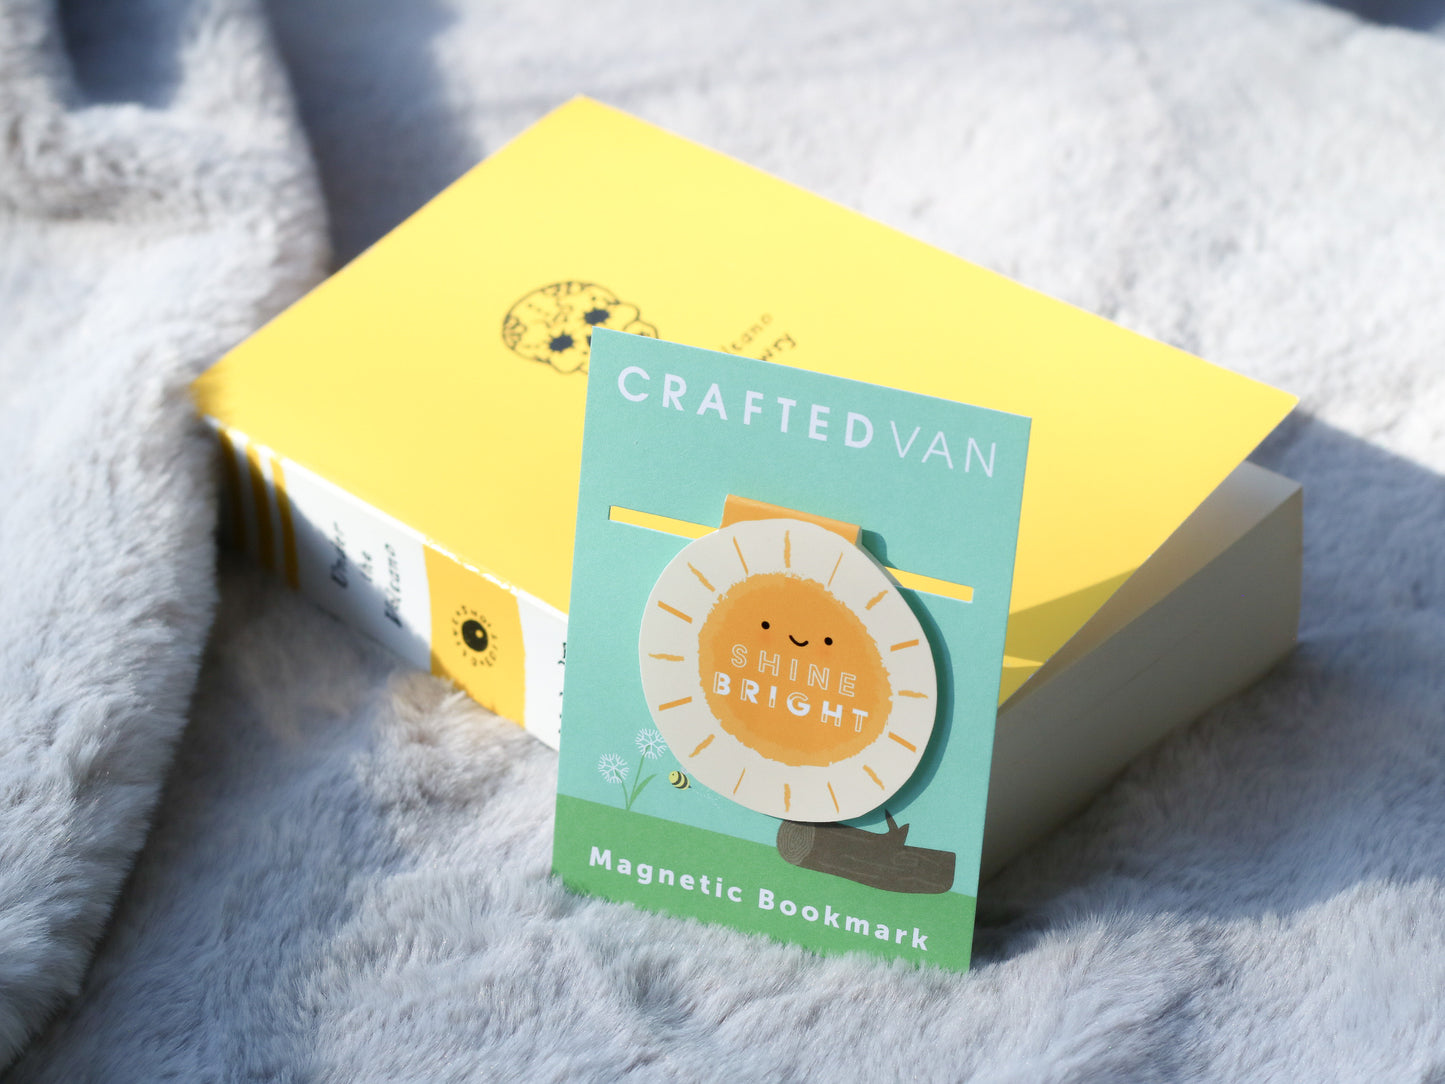 Shine Bright Sunshine Magnetic Bookmark by Craftedvan, in it's packaging and alongside a book.